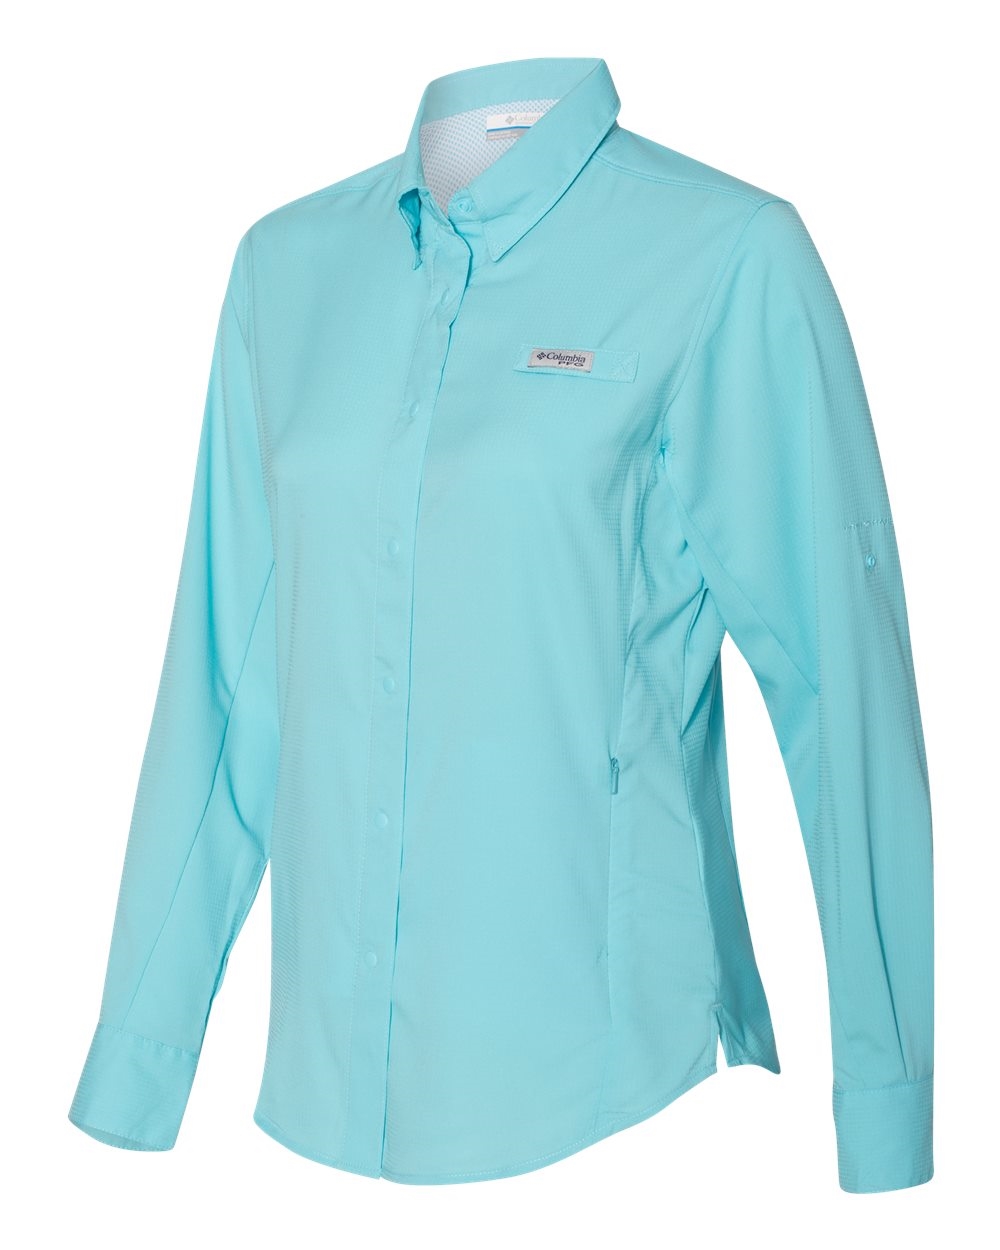 Columbia Women's PFG Tamiami™ II Long-Sleeve Fishing Shirts 127570. Free  shipping available. 30 Day Return Policy. Quantity Discounts.